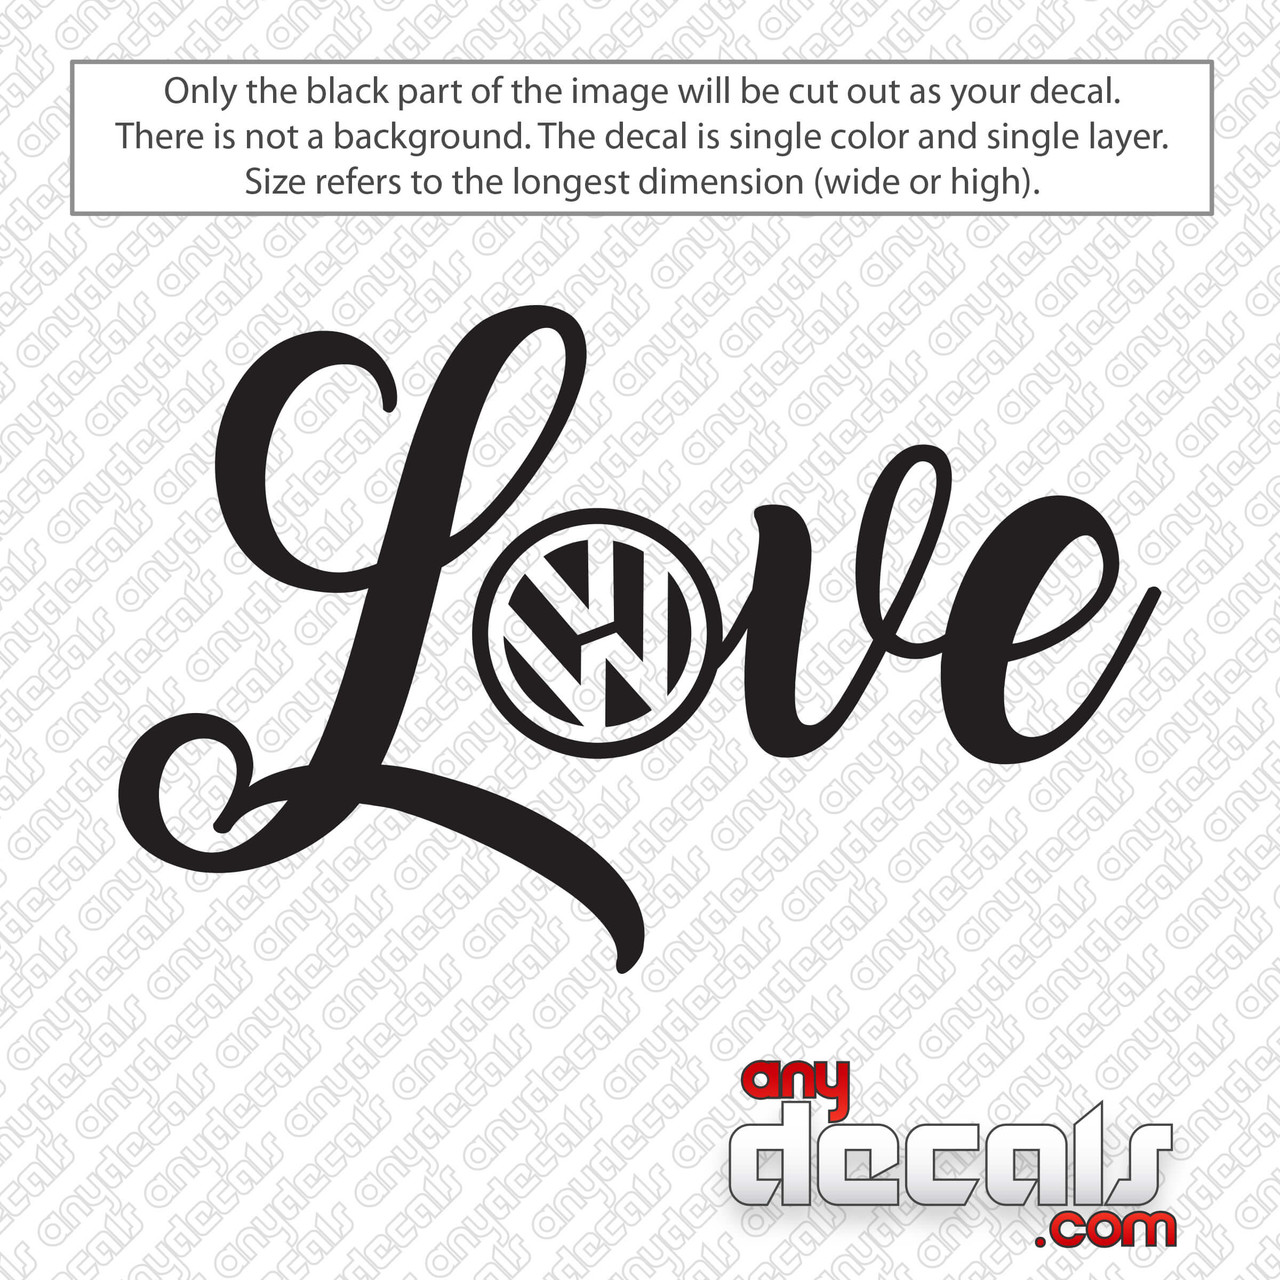 https://cdn11.bigcommerce.com/s-df97c/images/stencil/1280x1280/products/900/1899/volkswagen-love-car-decal-sticker__83598.1592977940.jpg?c=2?imbypass=on